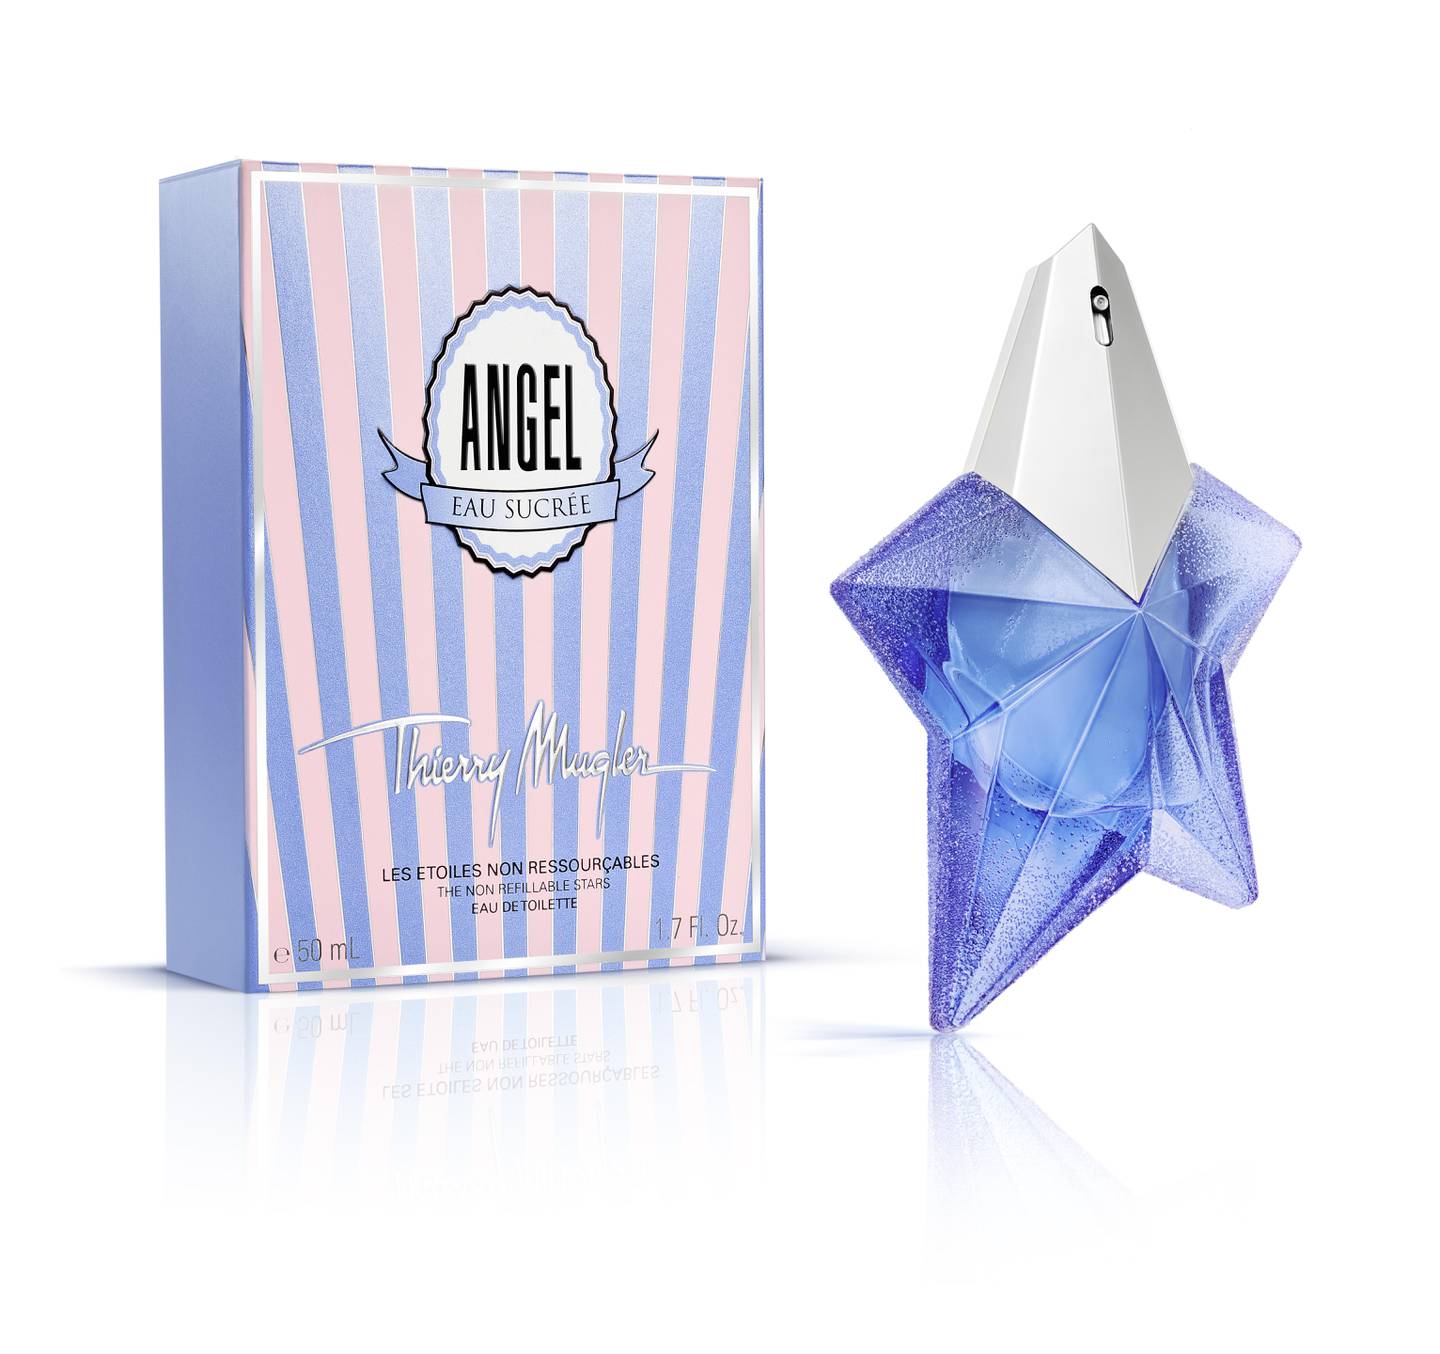 Document by Thierry Mugler, Angel Eau Sucrce Limited Edition 2015. Courtesy: Thierry Mugler.  NOTE: Rebecca McLaughlin-Duane - June 2015 - Eid fragrance *** Local Caption *** Thierry Mugler_Angel Eau Sucrce Limited Edition 2015 (2).jpg